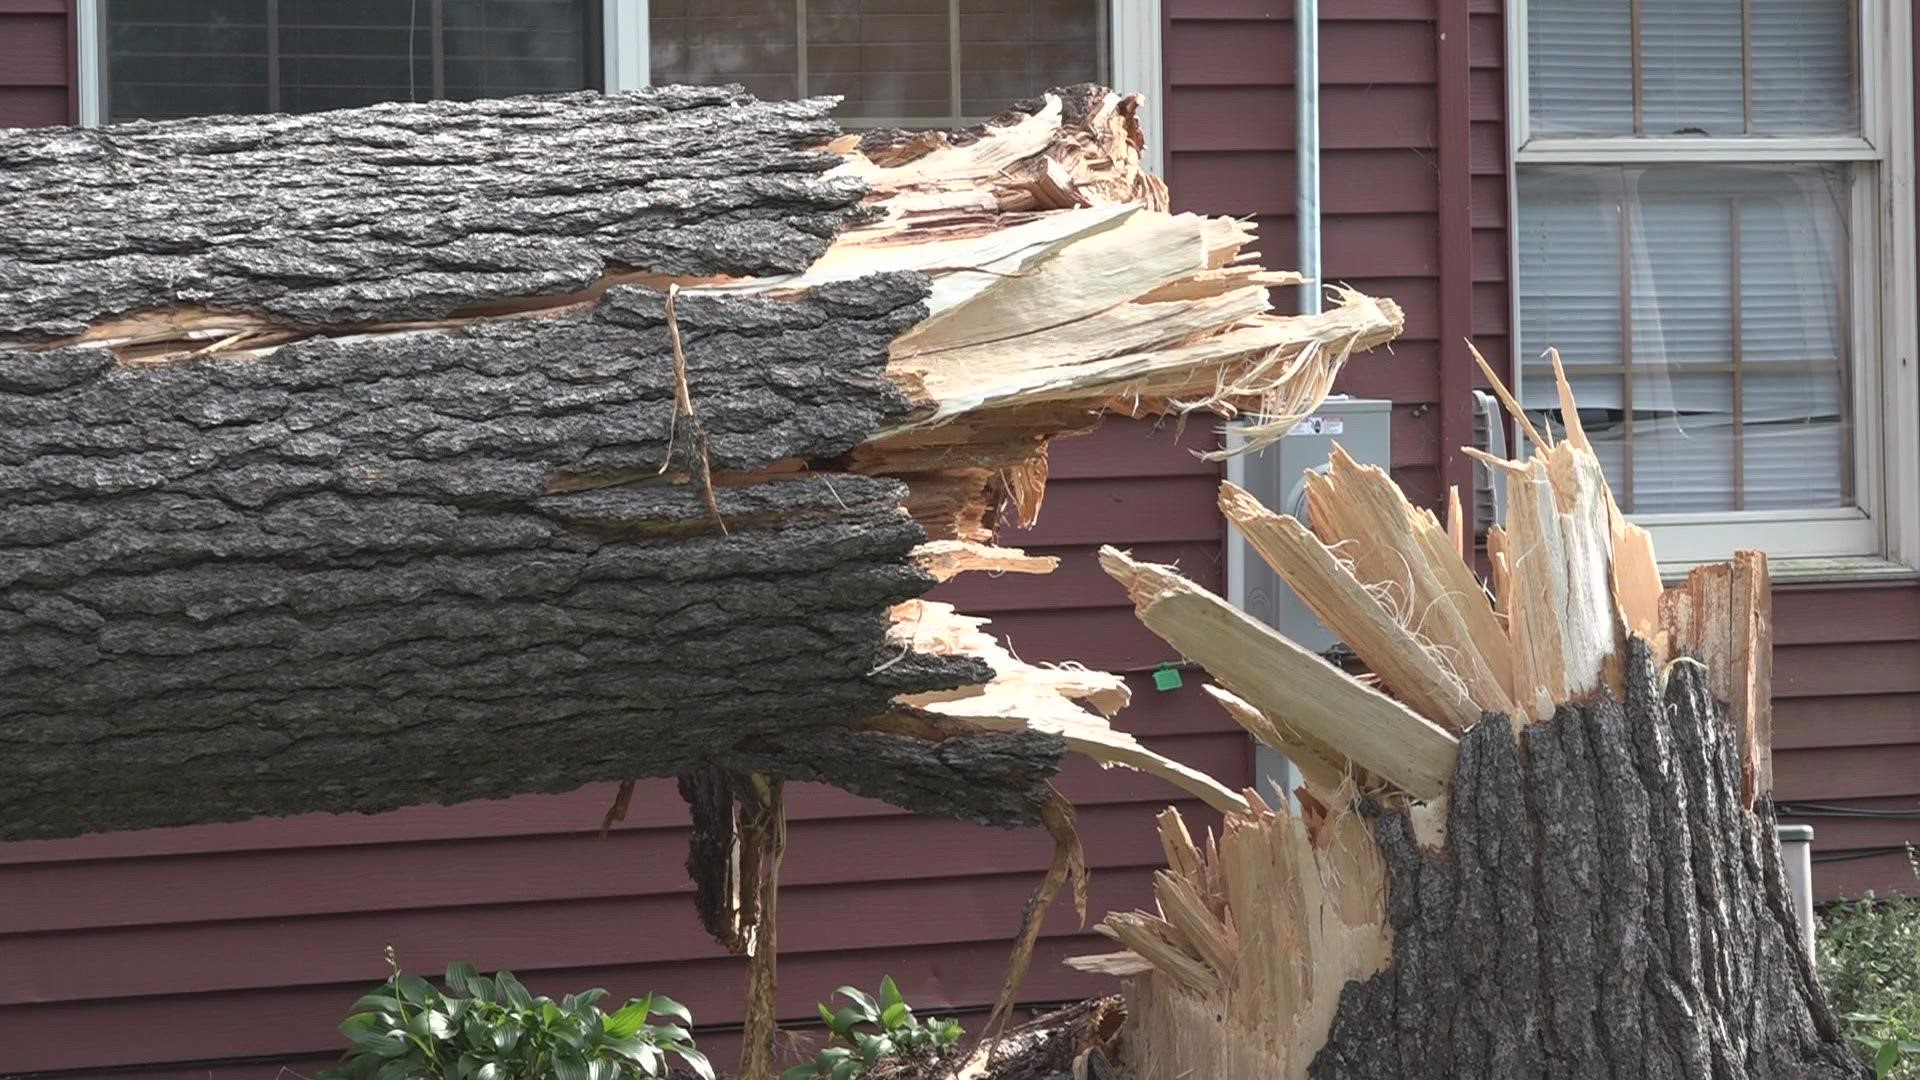 As severe storms pushed through West Michigan this week, one confirmed tornado touched down in Allegan County.